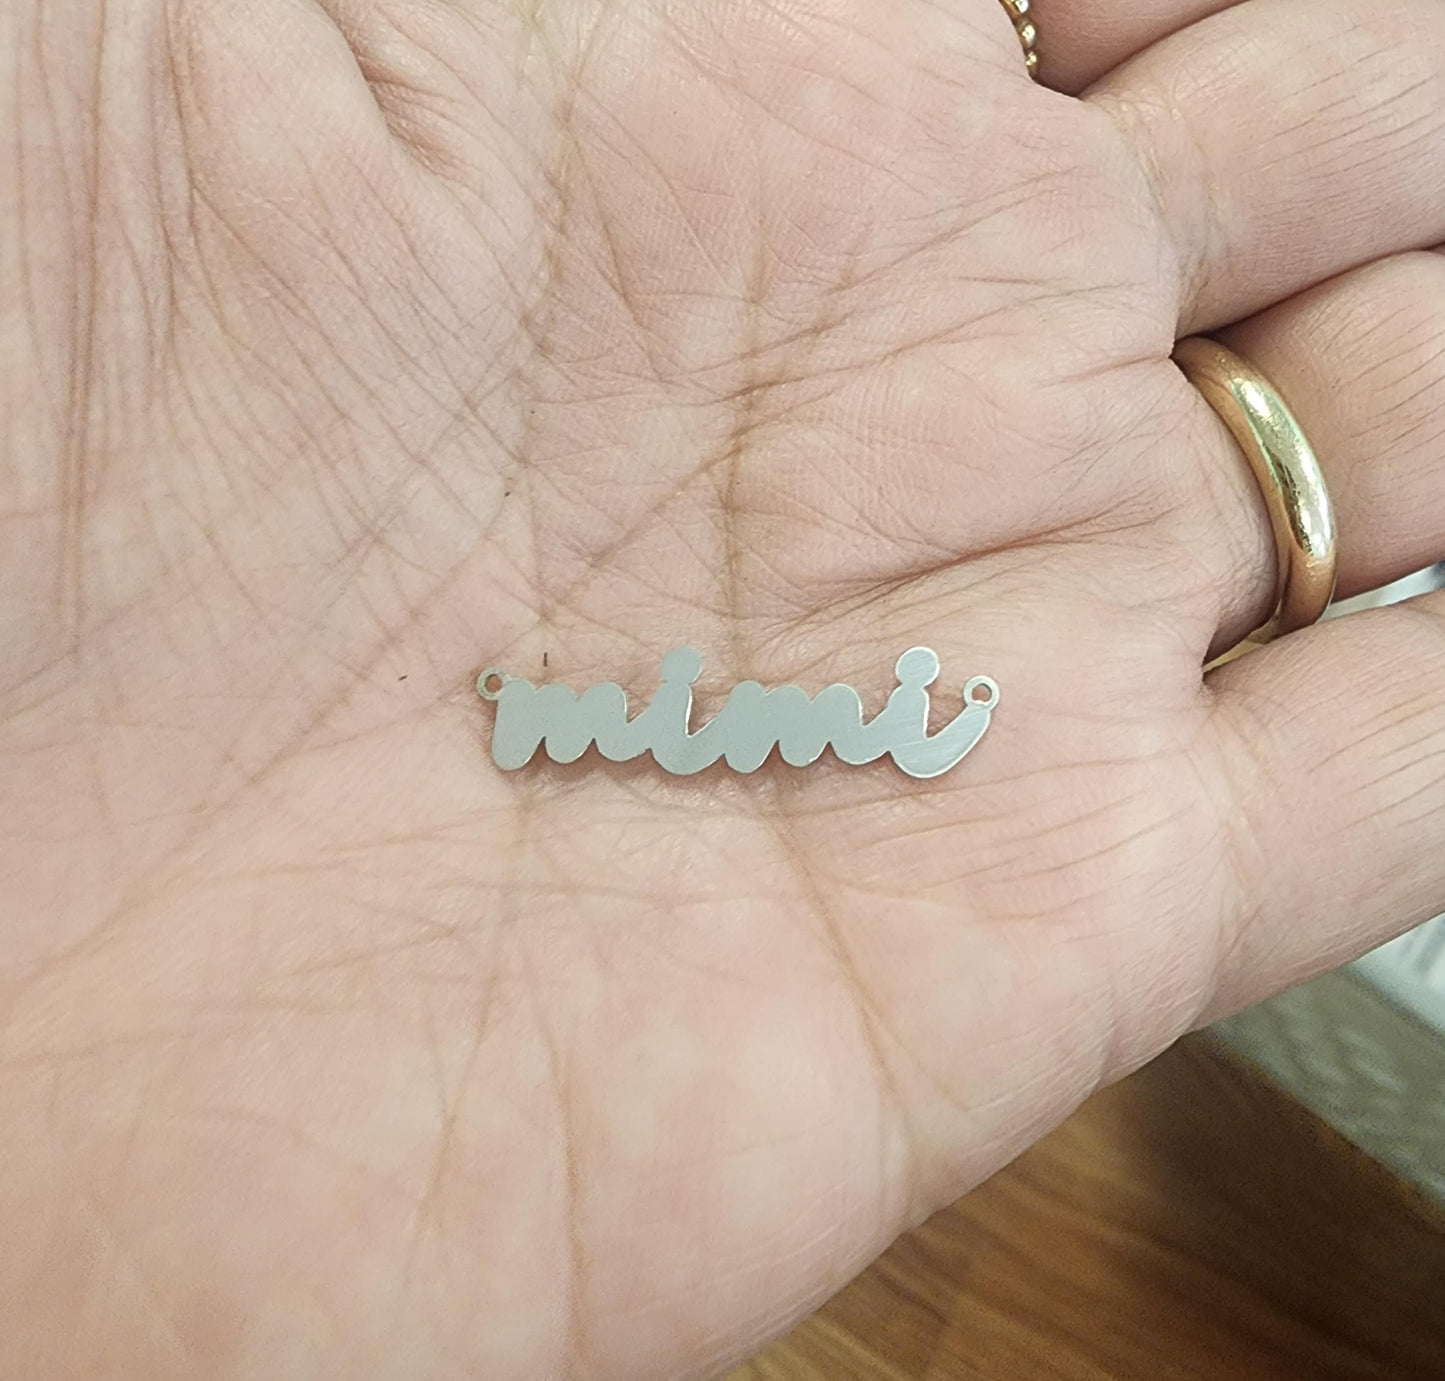 gold filled or sterling silver  mimi connector - we can make any word or small shape - permanent jewelry word connectors